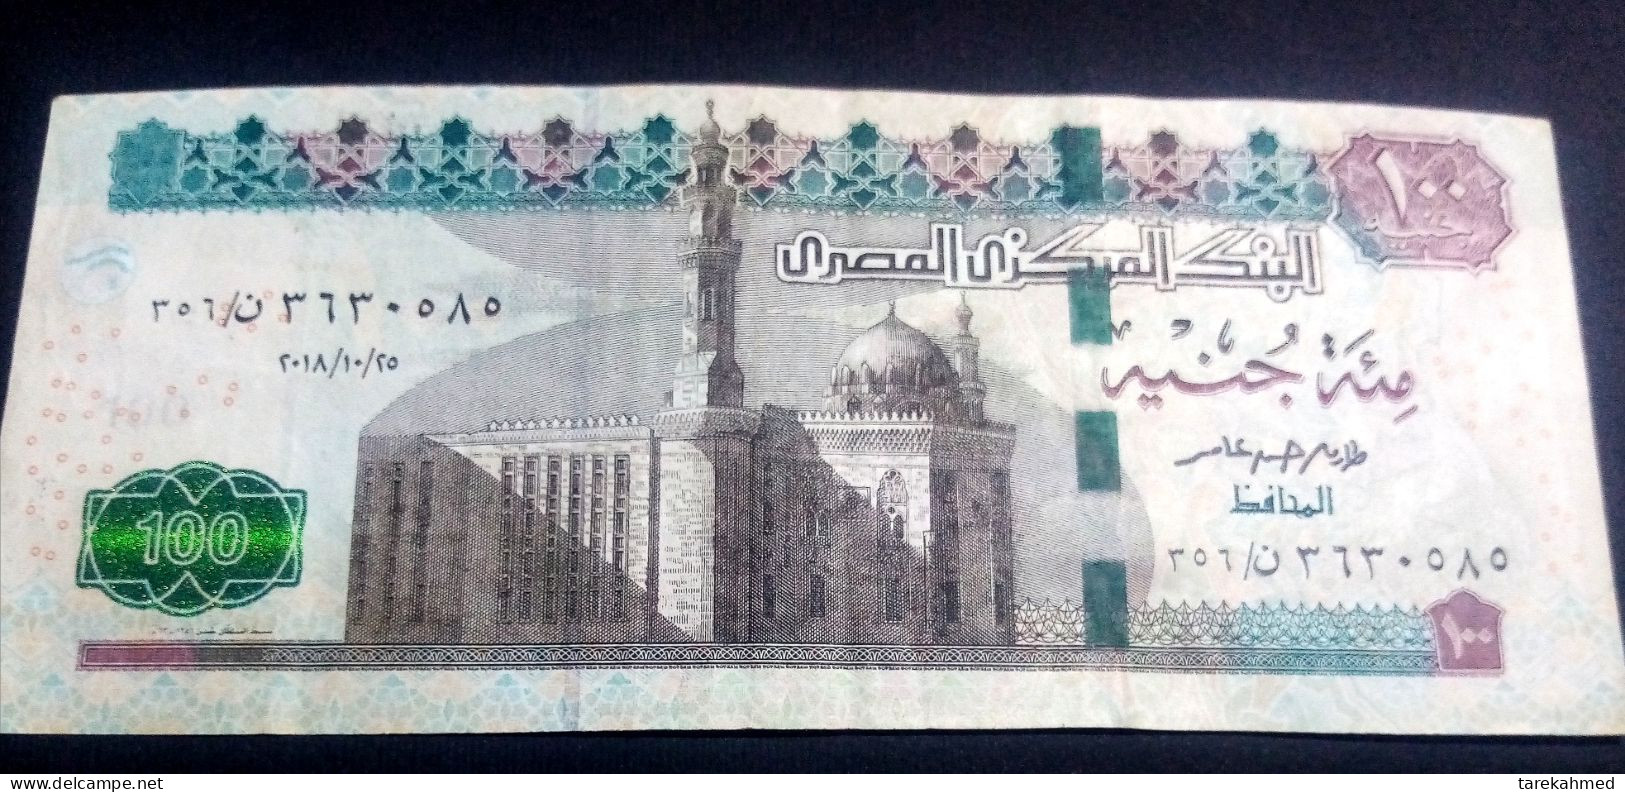 Egypt 2018, Rare Color ERROR Of Sphinx (red Instead Of Black), 100 Pounds Banknote, P-76 - Egypt